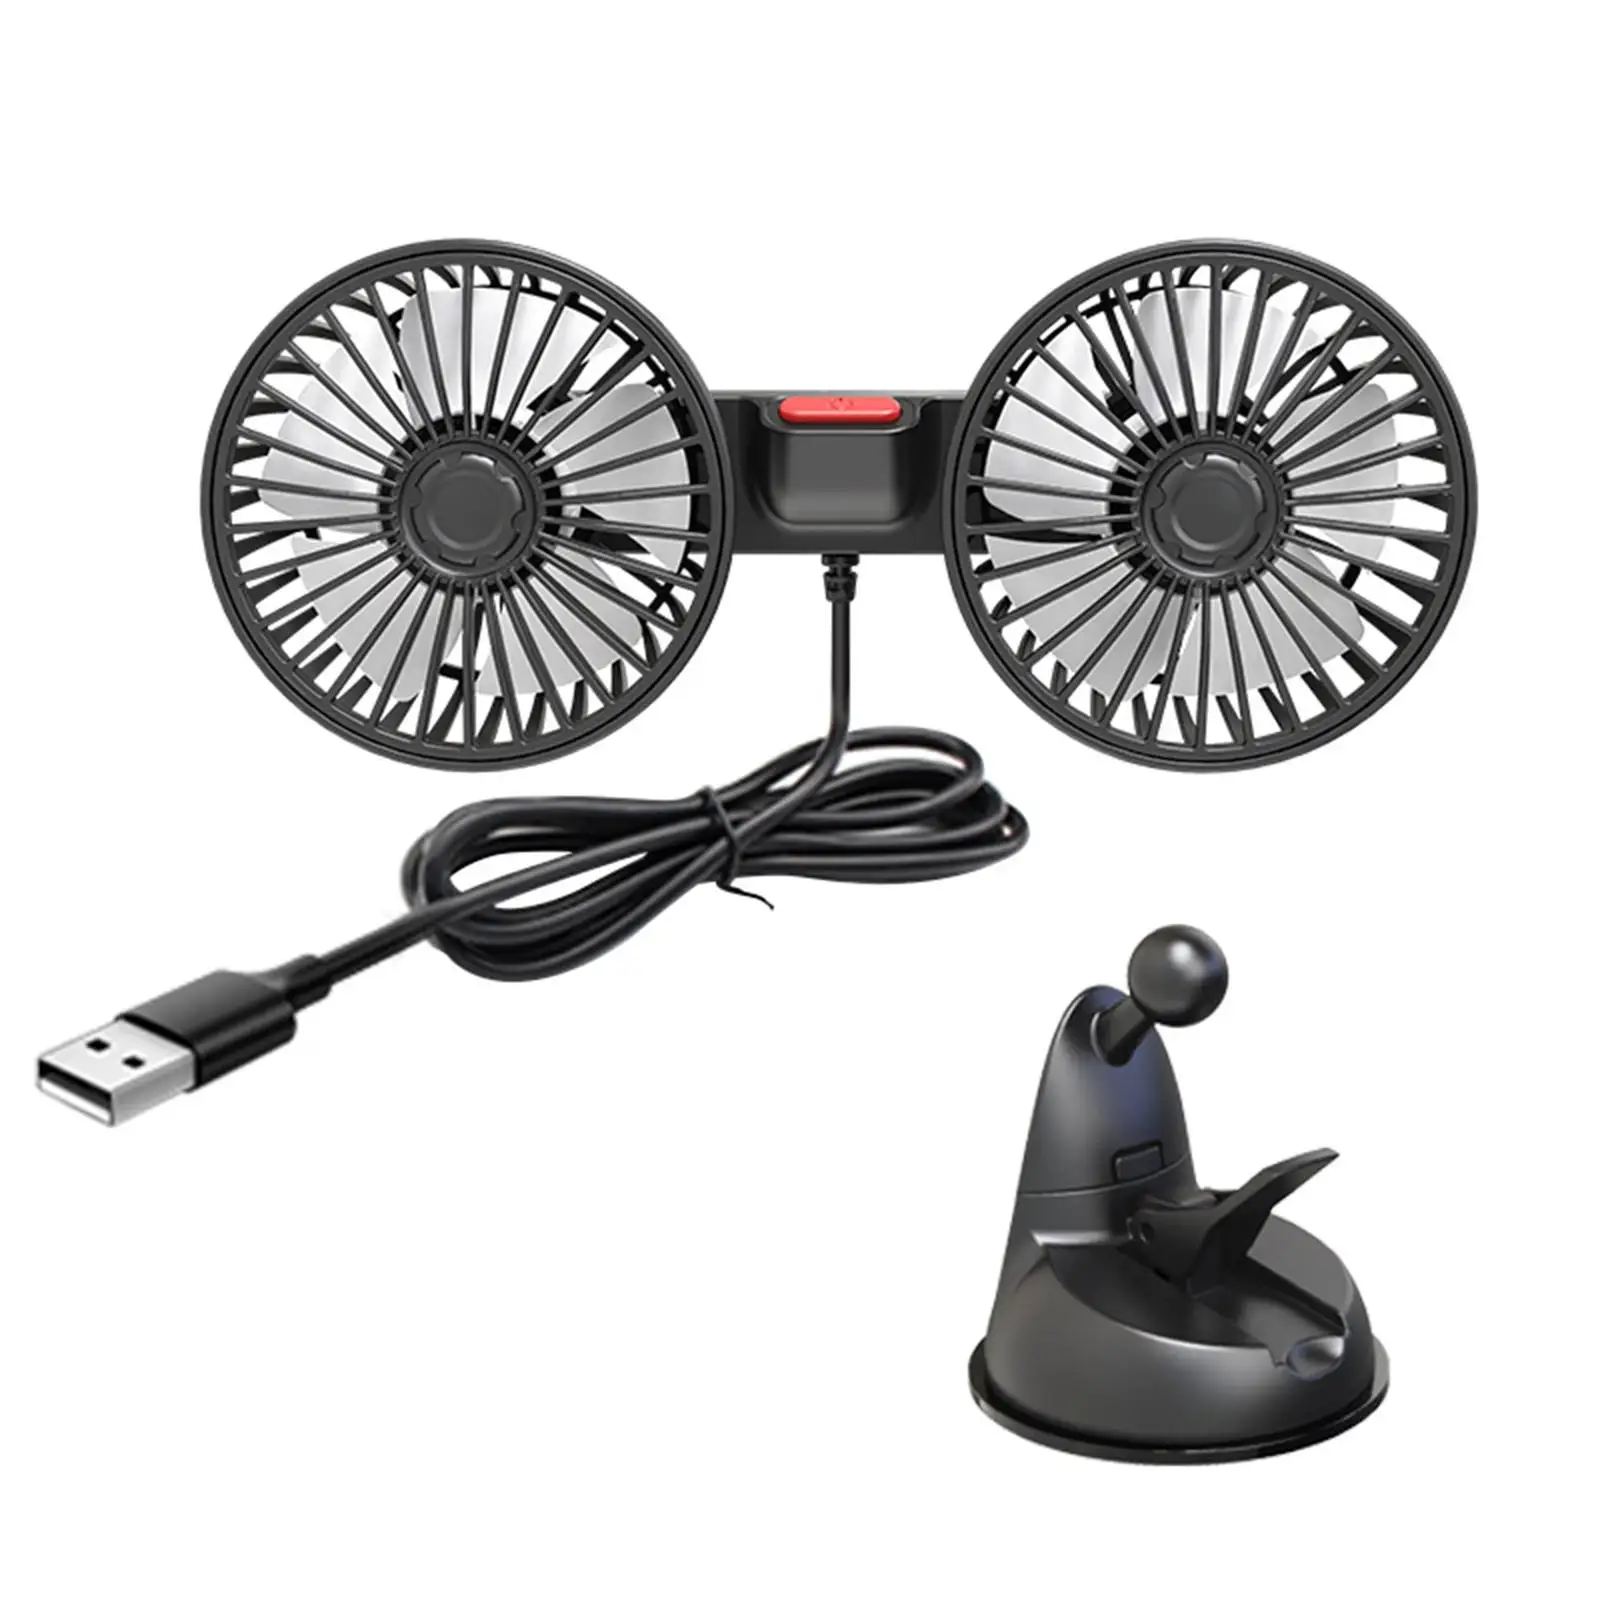 Car Cooling Fan Wind Regulation Car Accessories for Office Home Sedan